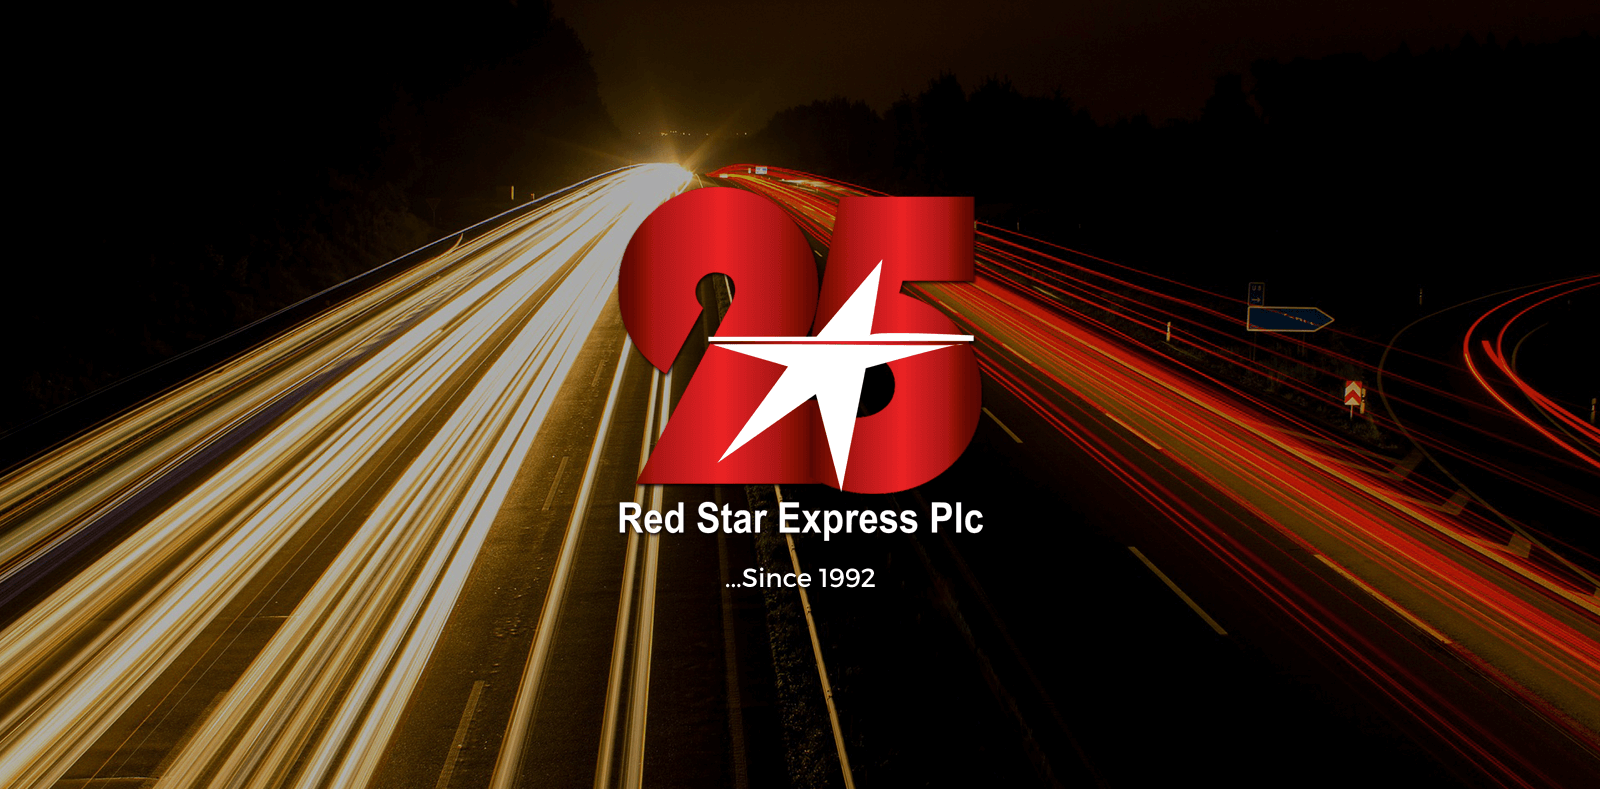 NSE Reclassifies Red Star Express as Low-Priced Stock